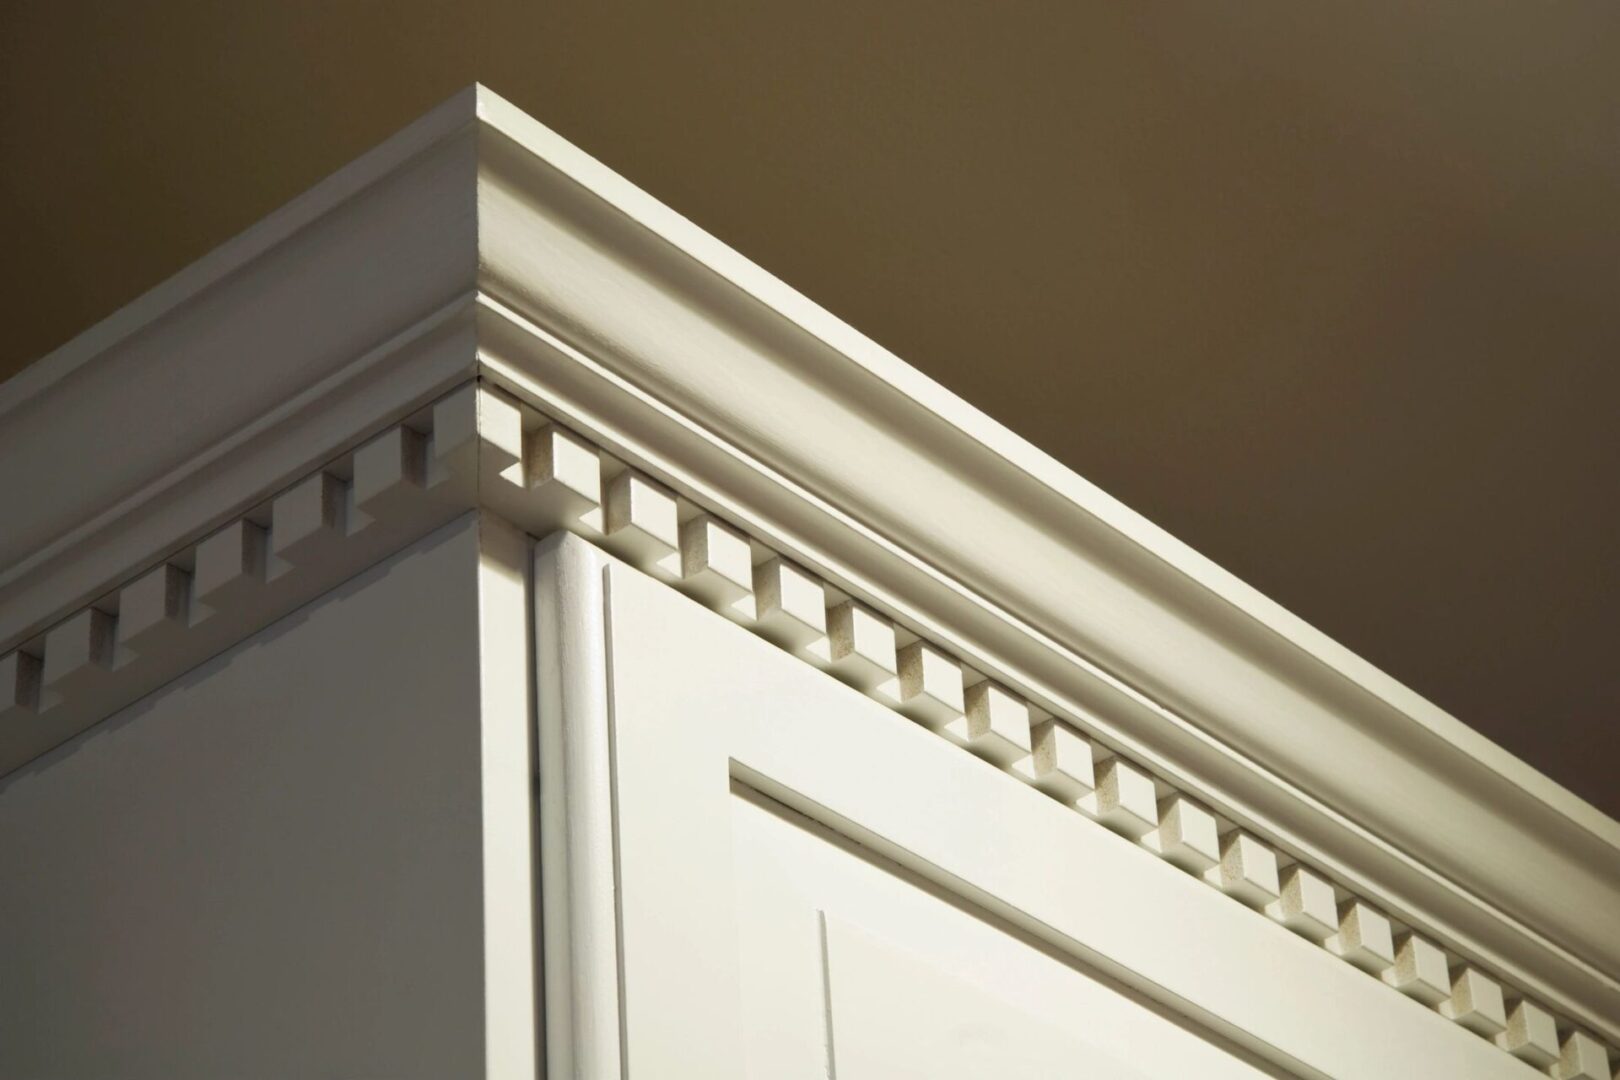 A close up of the corner of a cabinet